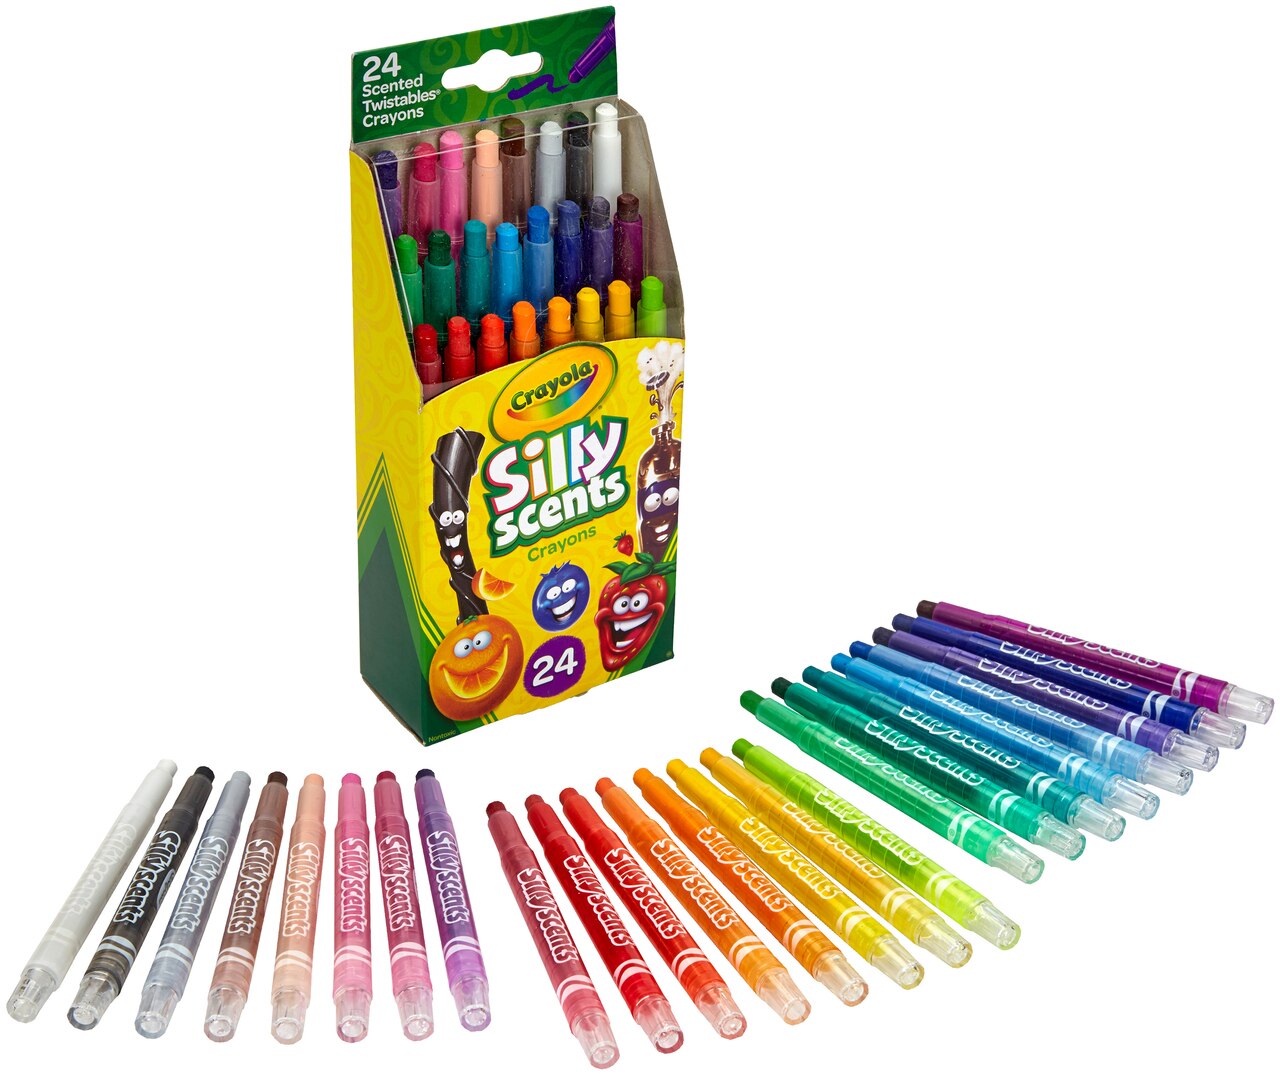 Crayola - 24 Silly Scents Mini Twistables Scented Crayons